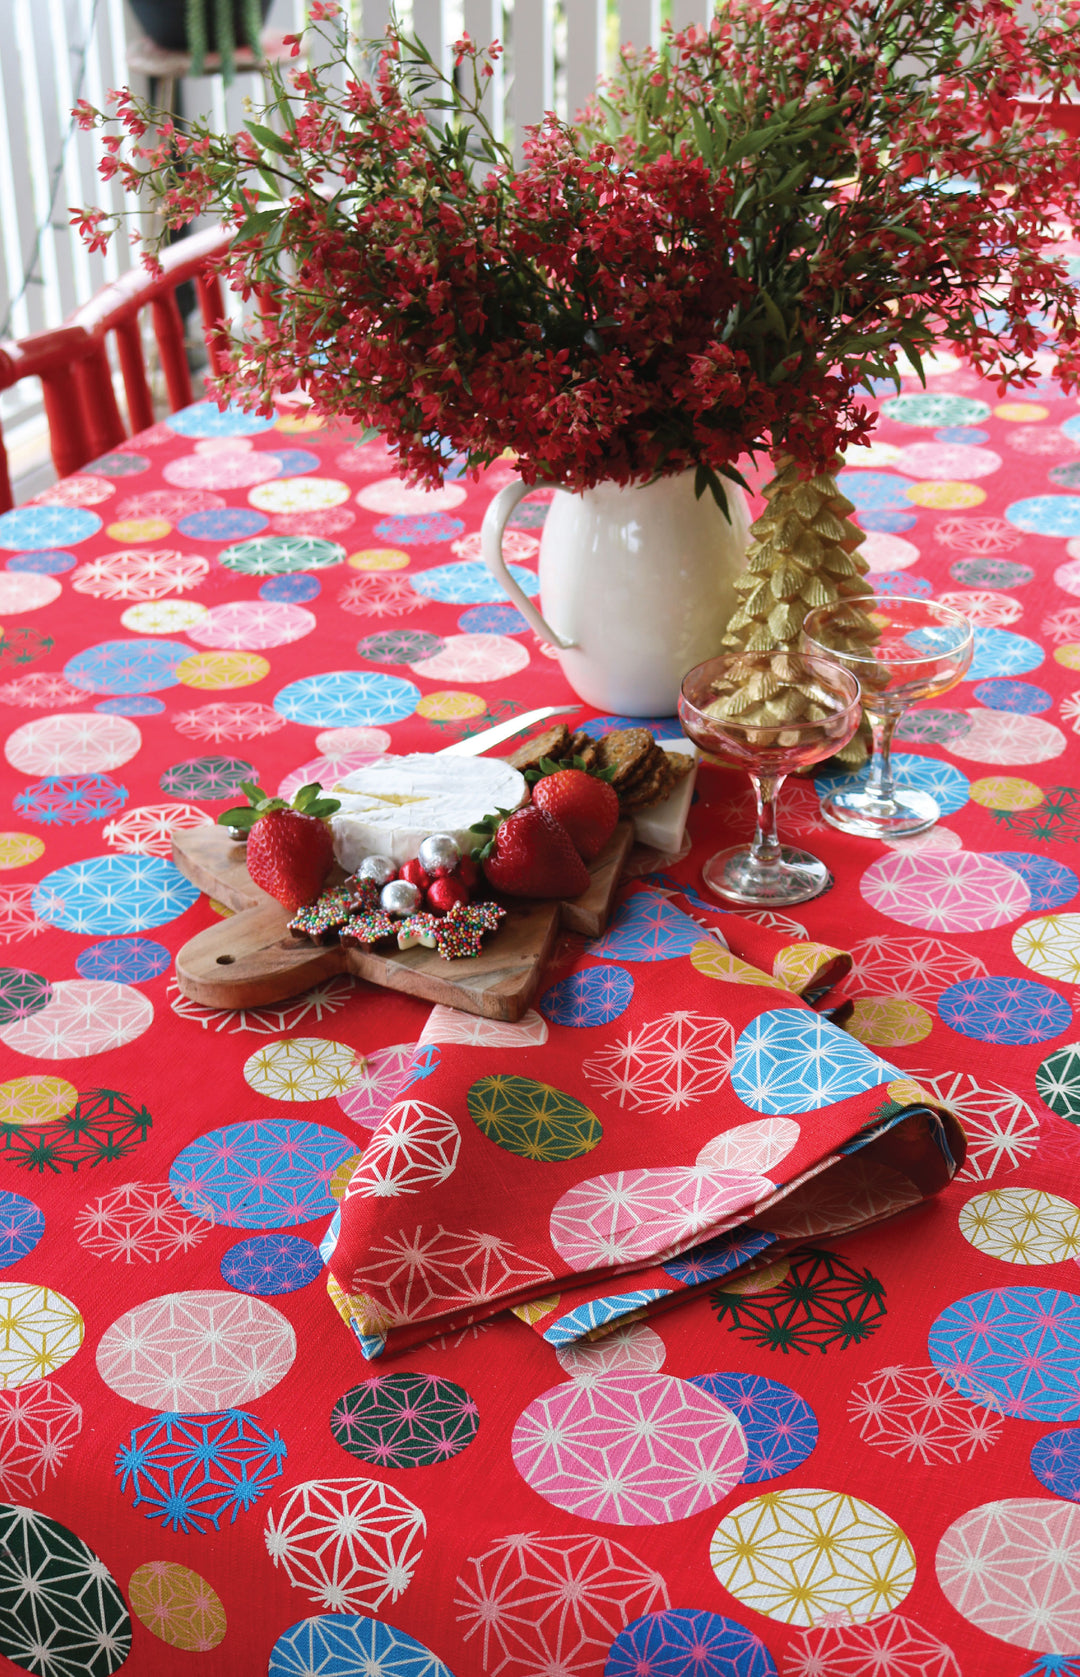 Tablecloth Large in jingle